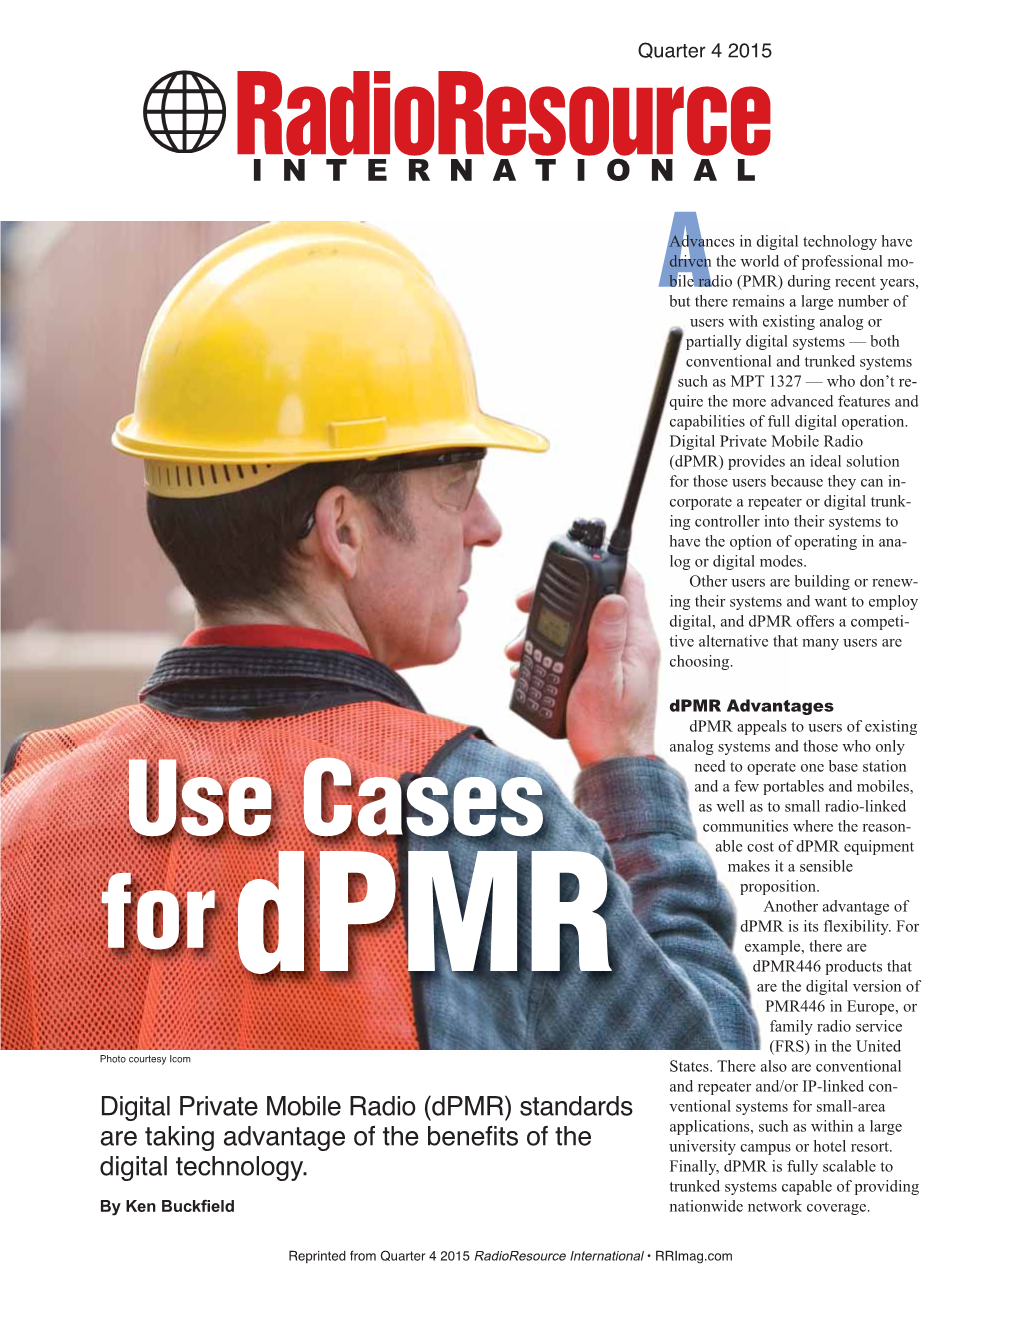 The Case for Dpmr